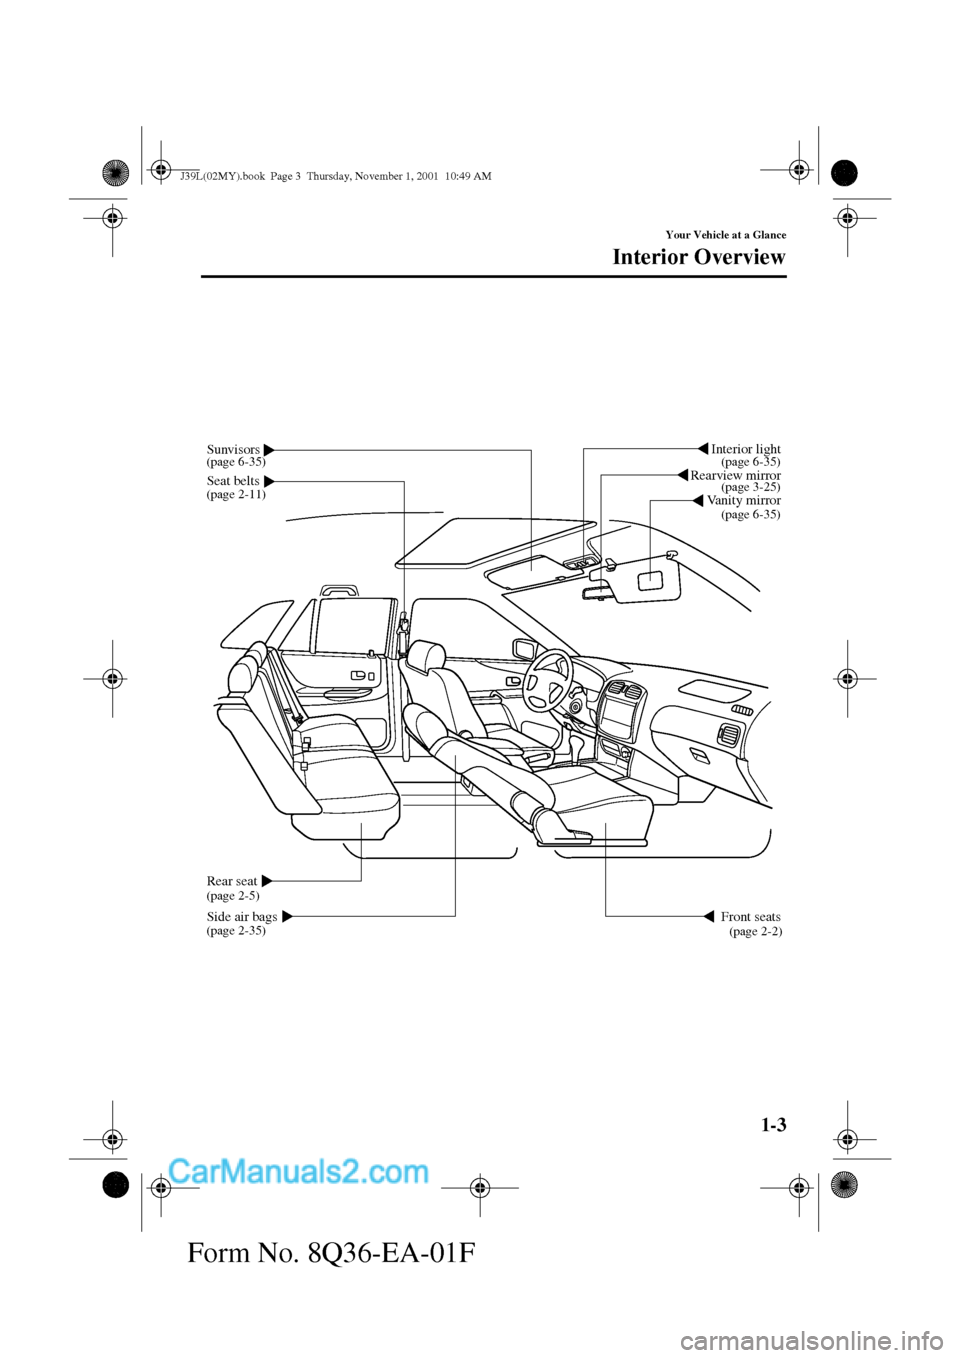 MAZDA MODEL PROTÉGÉ 2002  Owners Manual (in English) 1-3
Your Vehicle at a Glance
Form No. 8Q36-EA-01F
Interior Overview
Vanity mirror
Rearview mirror
Seat belts
Interior lightSunvisors
Front seatsSide air bags
Rear seat
(page 6-35)
(page 2-11)
(page 2-